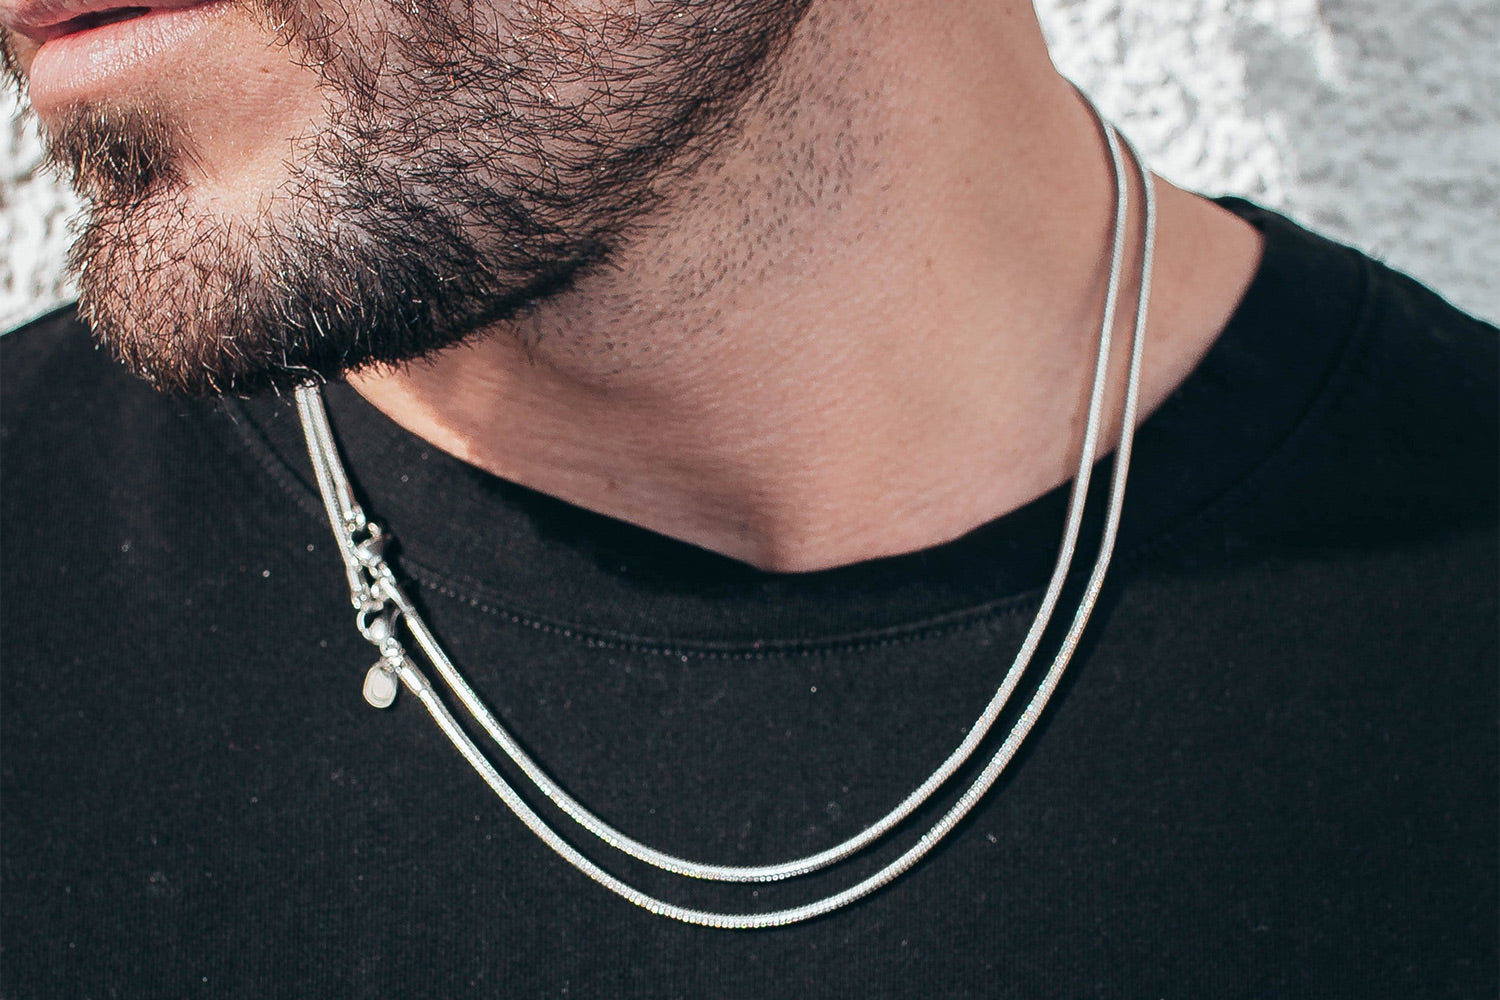 What Is a Toggle Necklace and How Do You Wear It?